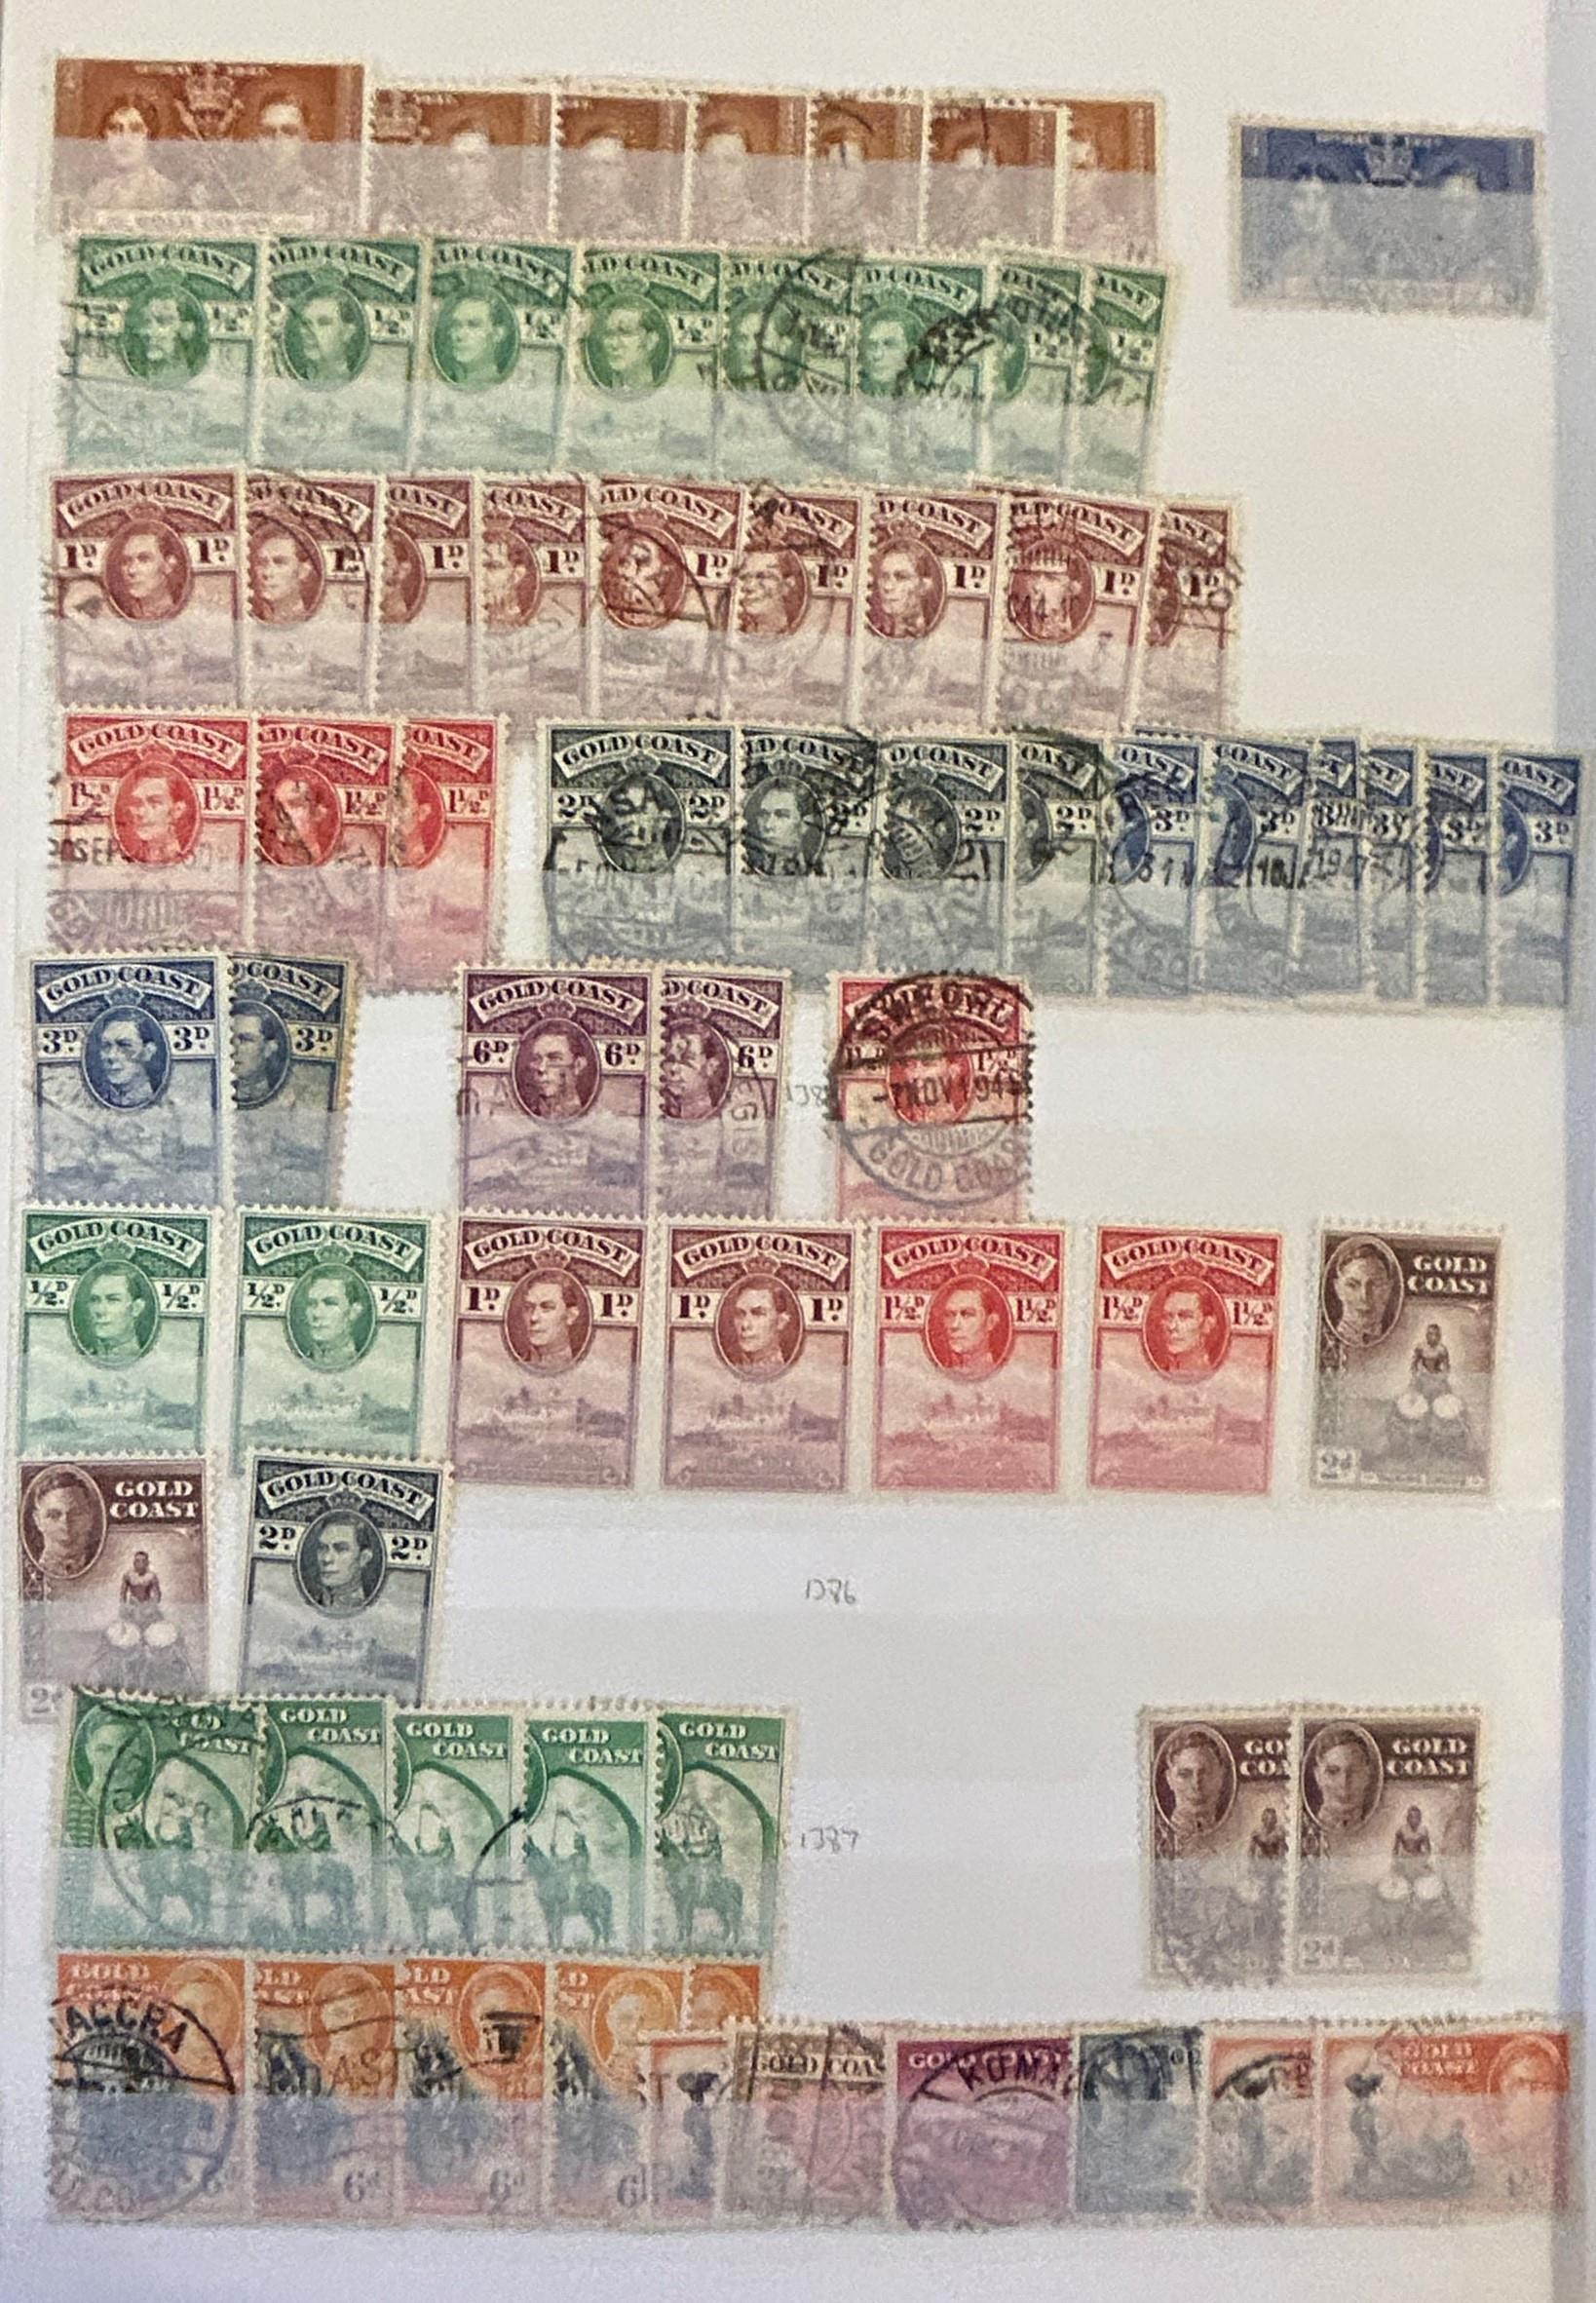 Assorted Commonwealth stamps, including Hong Kong, Tanzania, Cape of Good Hope, Aden, Canada, New